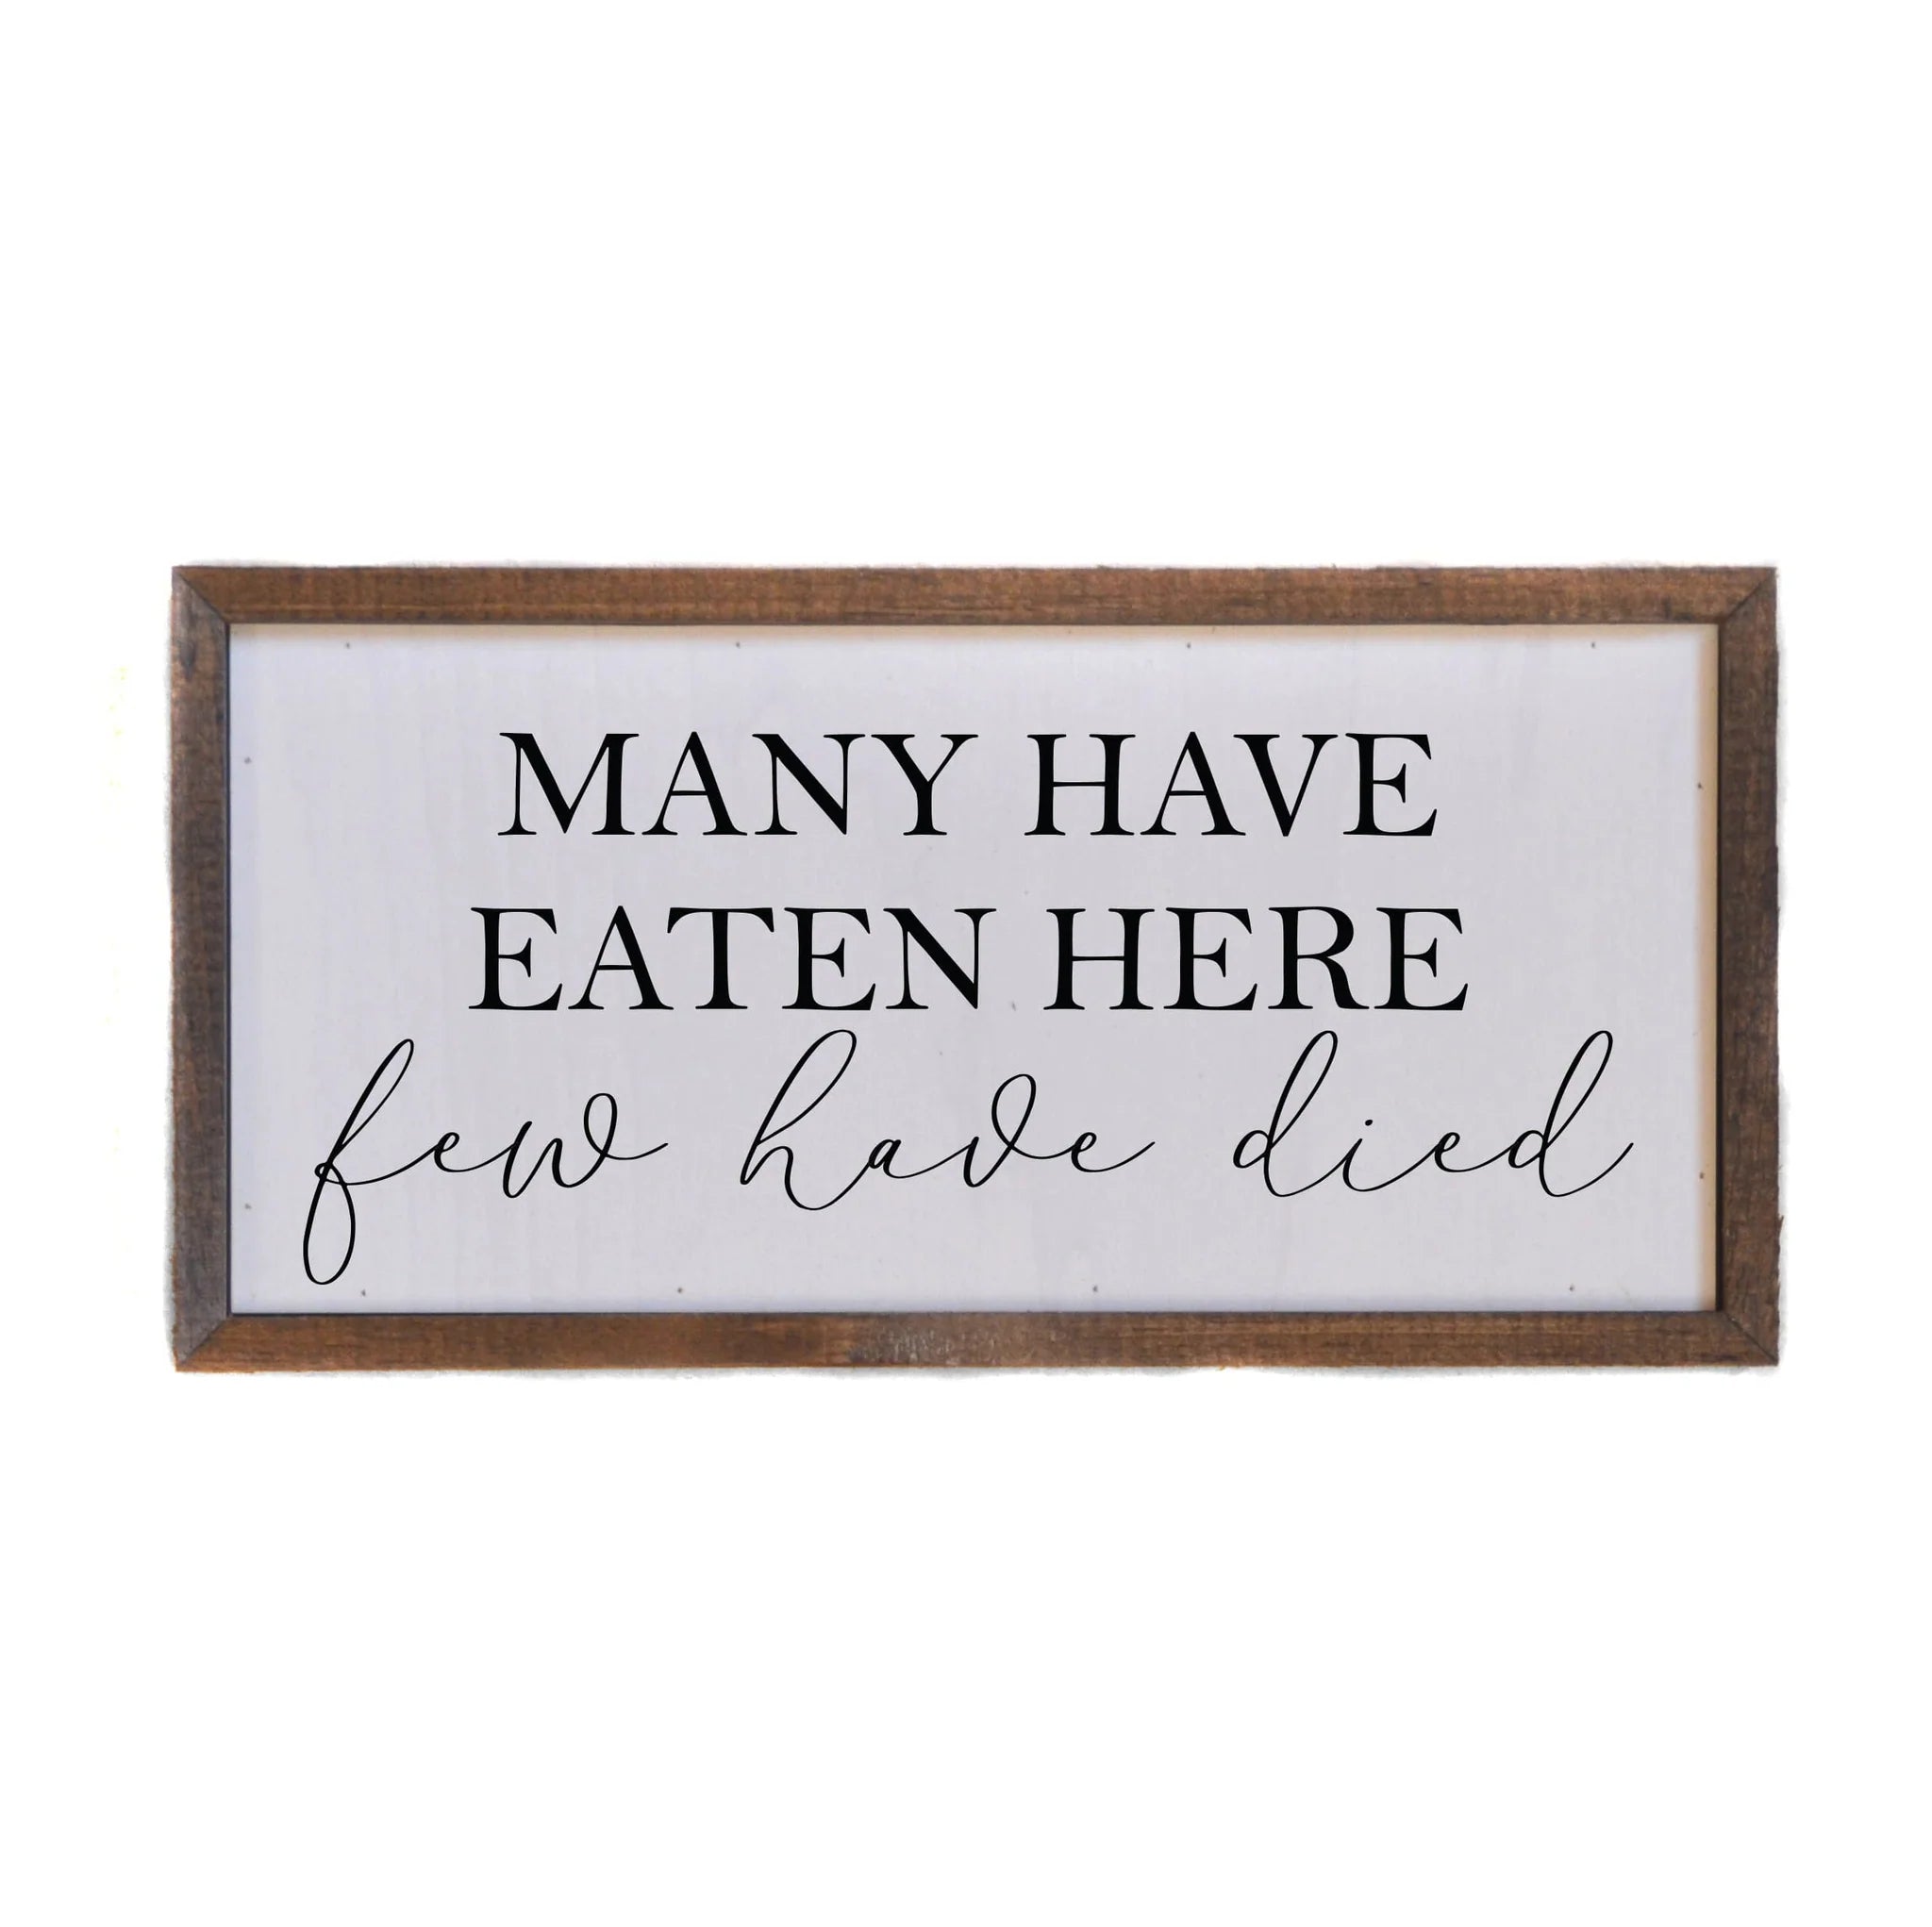 Many have eaten here sign